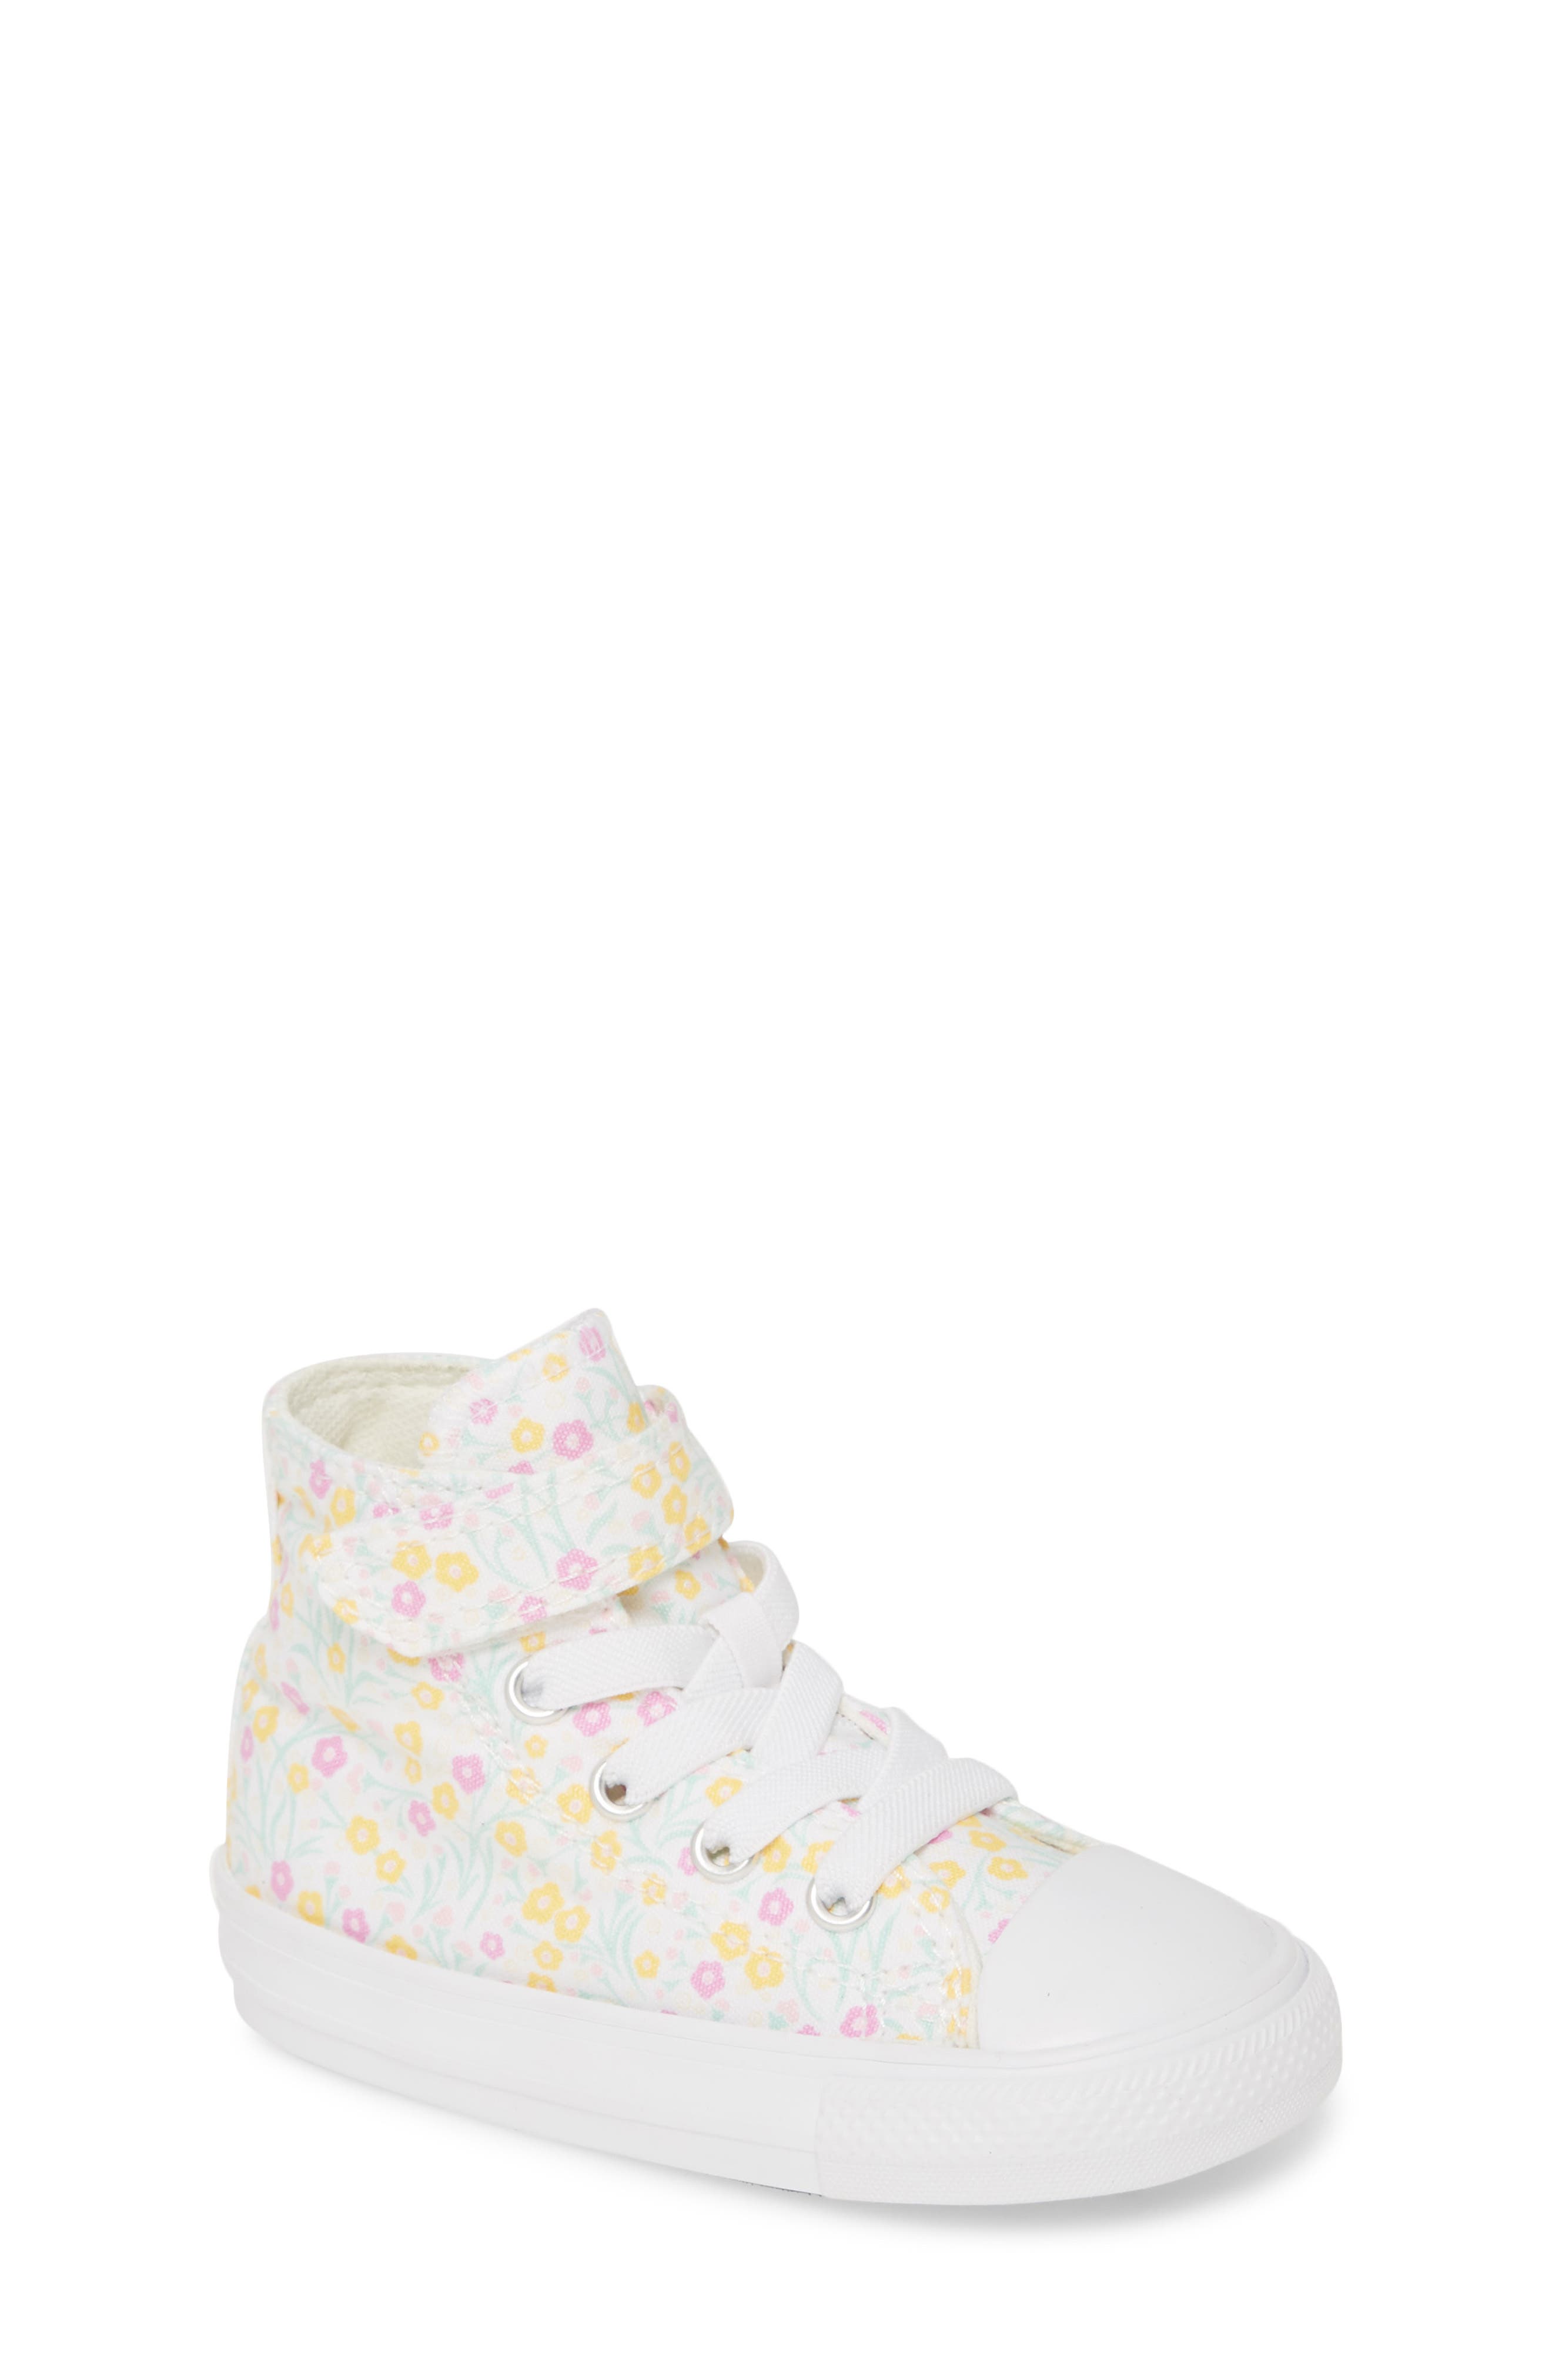 Girls' Converse Shoes Sale | Nordstrom